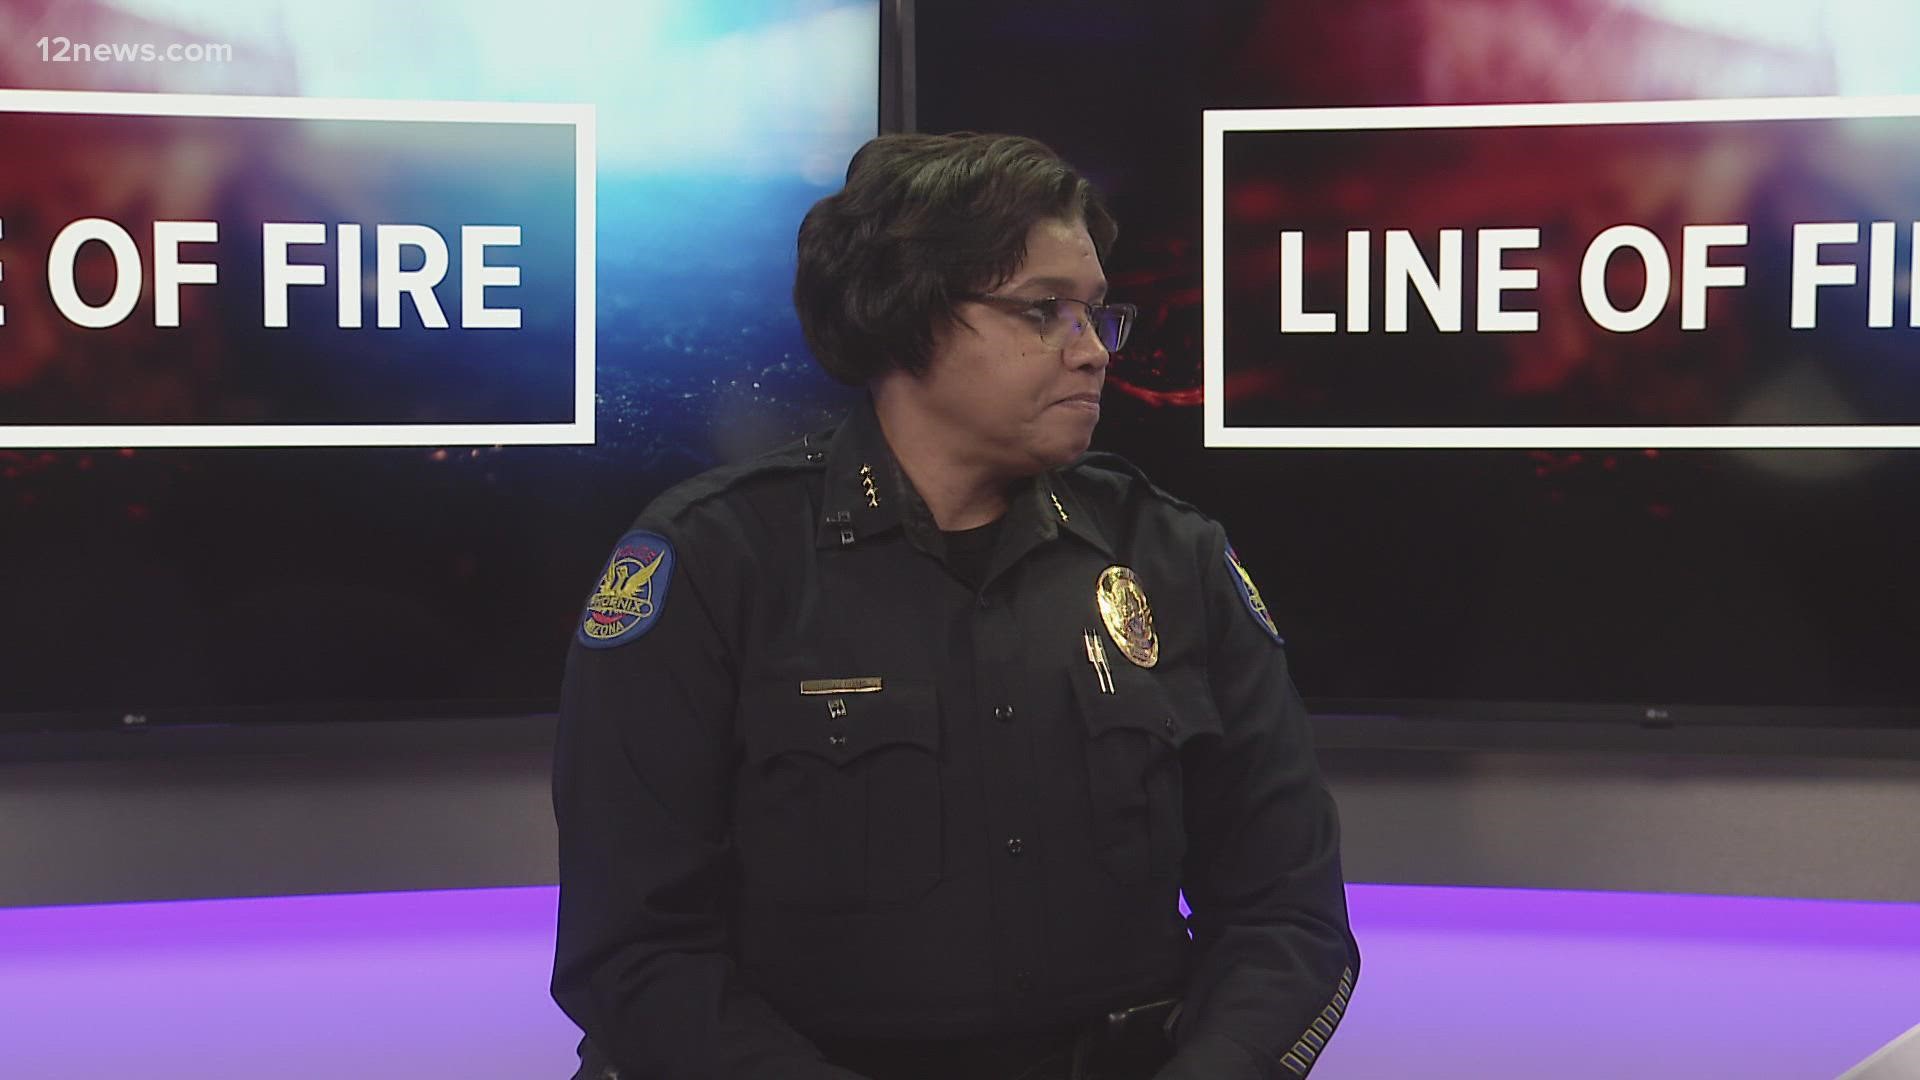 Phoenix police Chief Jeri Williams sat down with 12 News for an in-studio interview discussing violence against officers and rebuilding trust with the community.